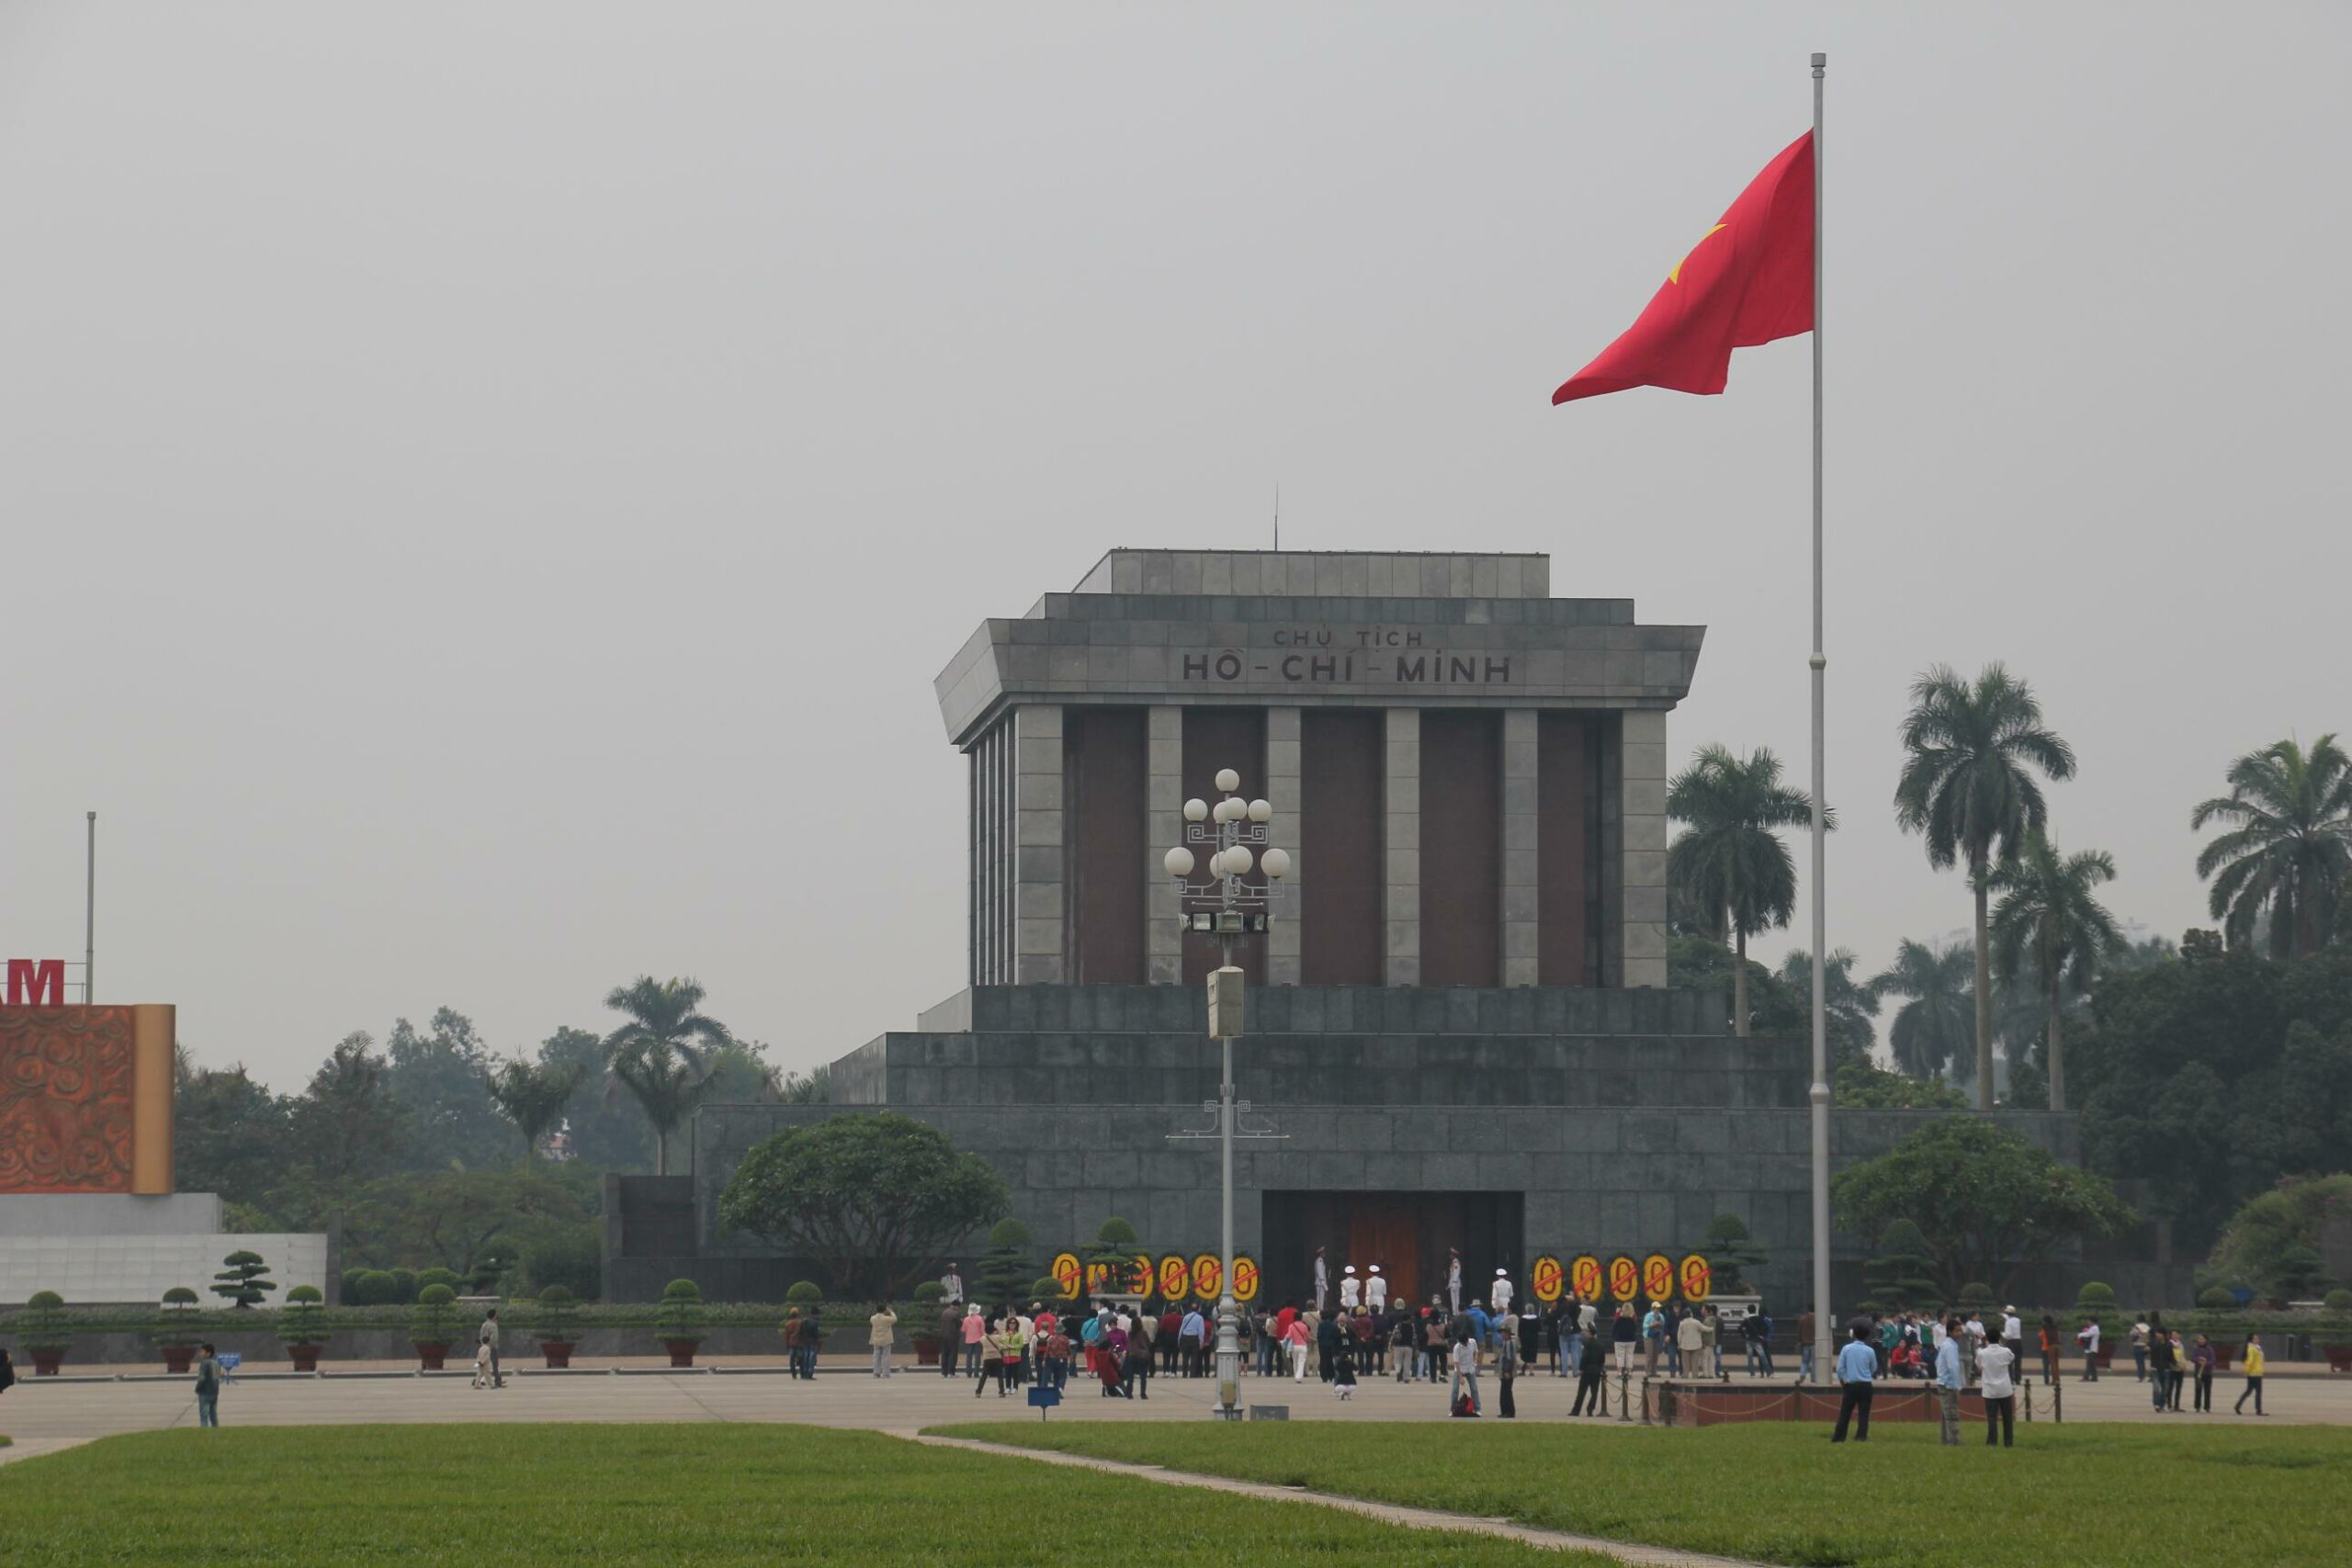 Ho Chi Minh's cryogenically frozen body lies in a mausoleum in Ba Dinh Square, Hanoi.